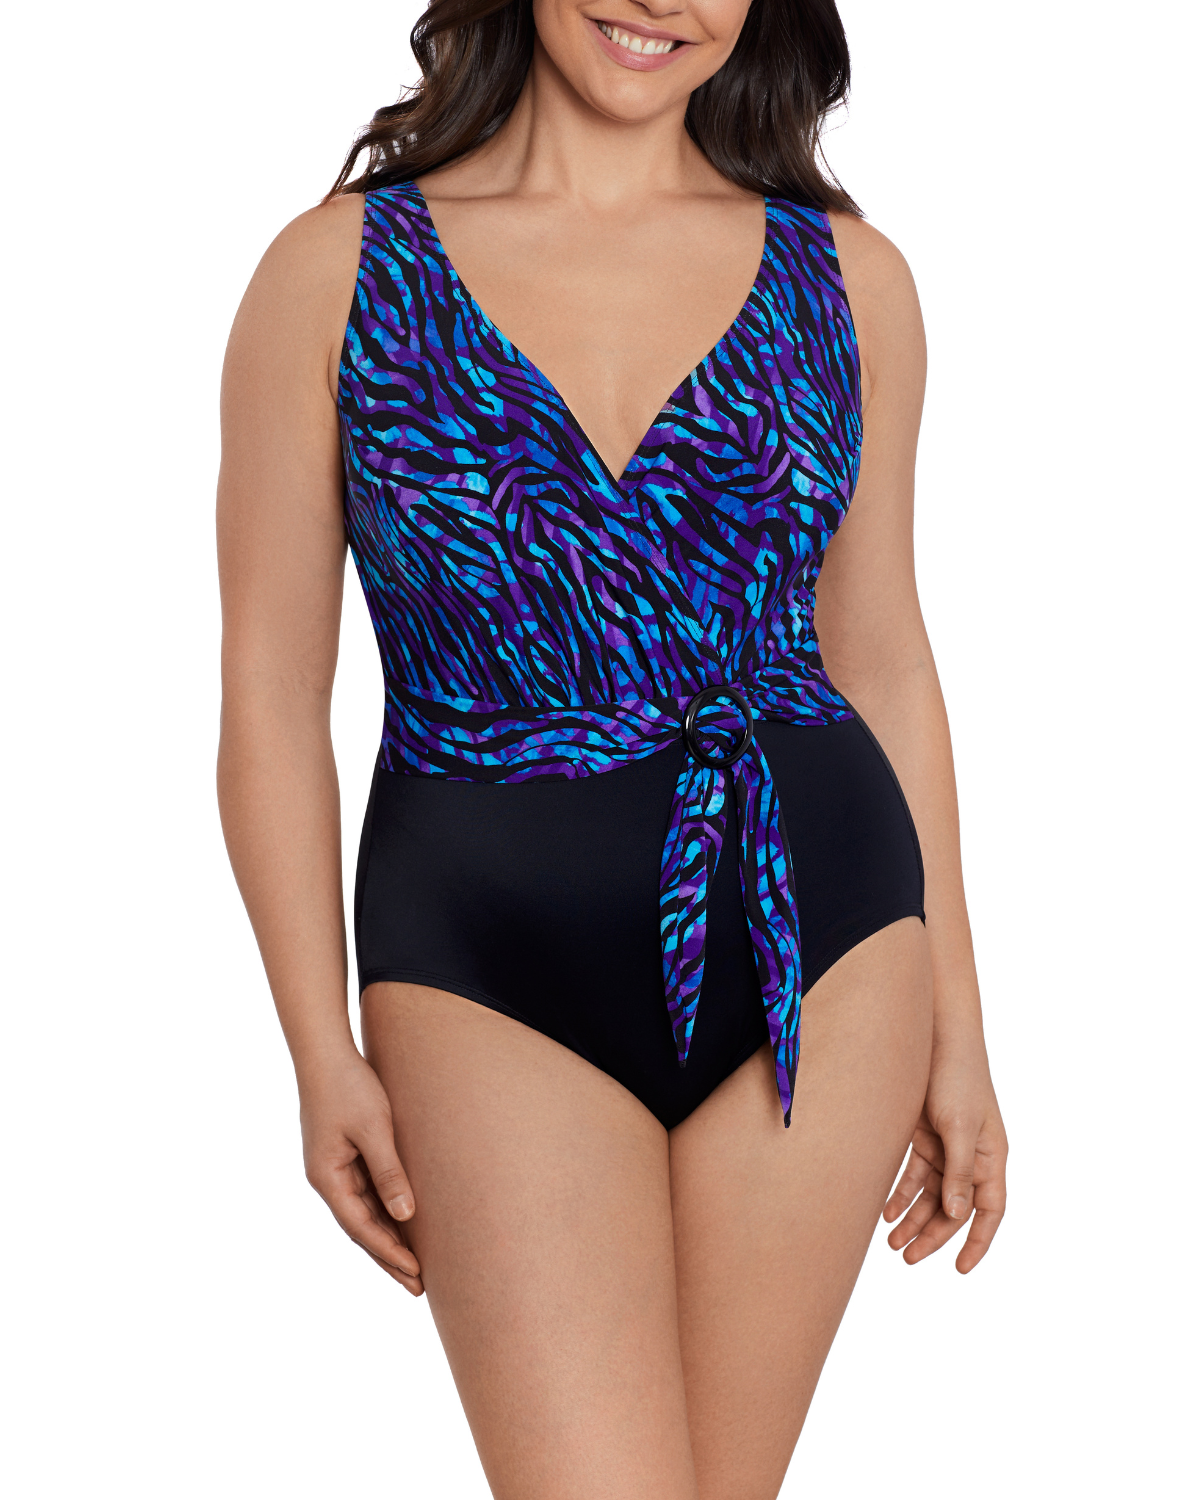 Model wearing a v-neck belted one piece swimsuit in a black base and black, purple, and navy animal print top half